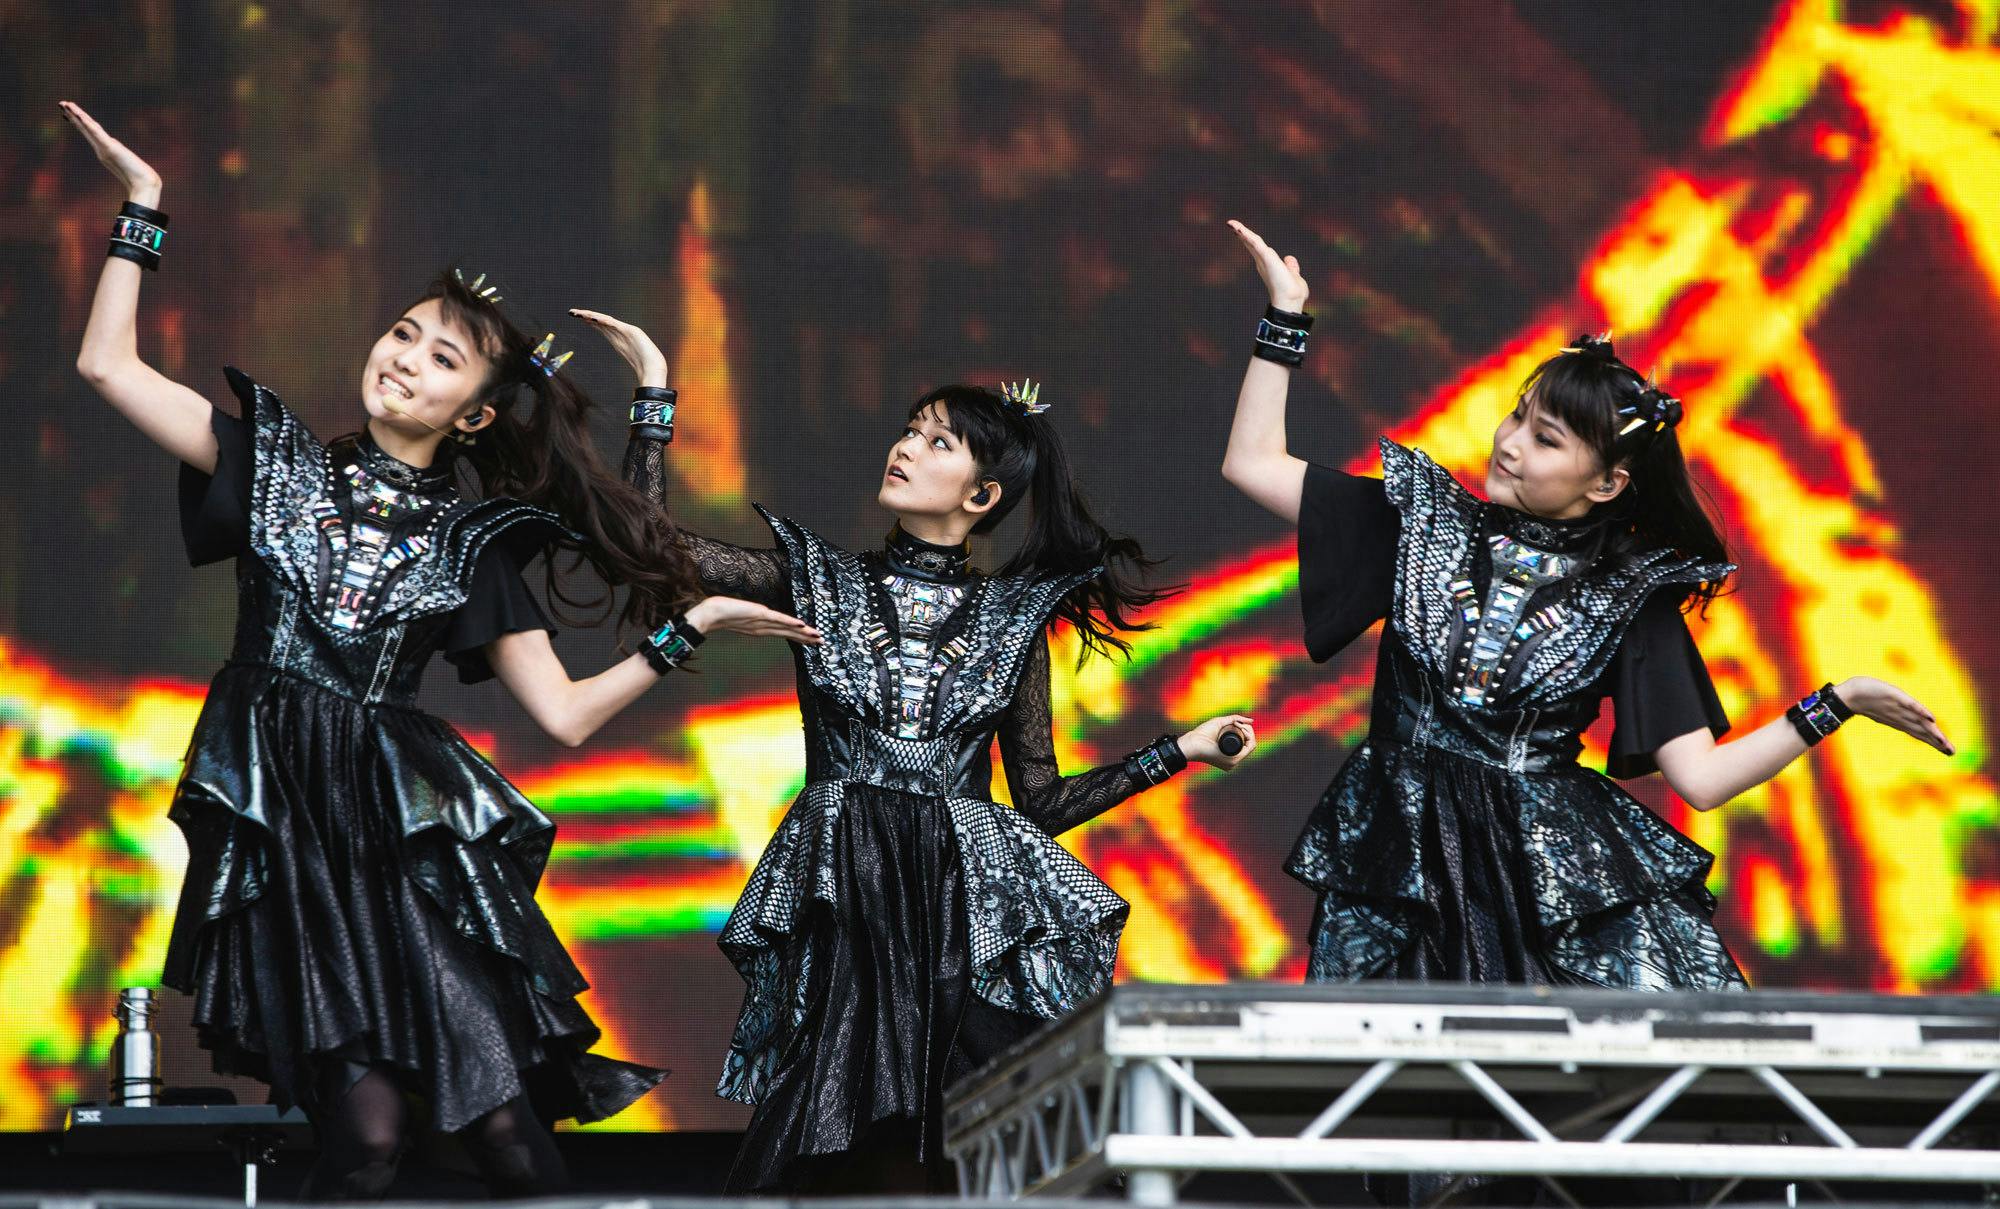 In Pictures: BABYMETAL At Glastonbury Festival 2019